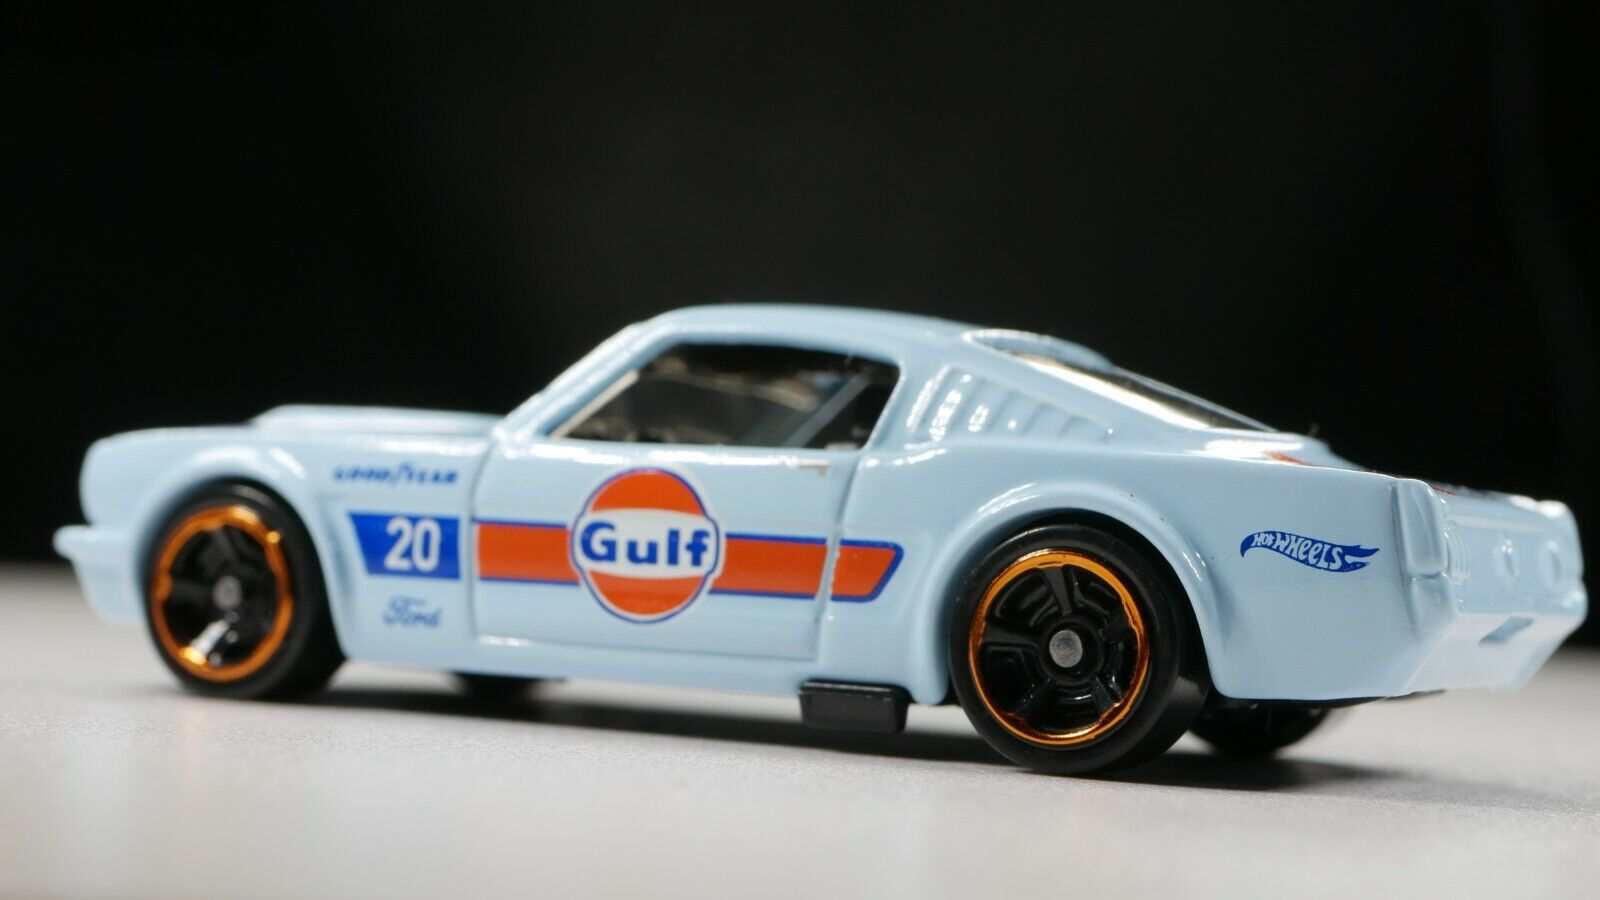 HOT WHEELS 1965 MUSTANG FASTBACK GULF SPEED GRAPHICS BLUE VERSION